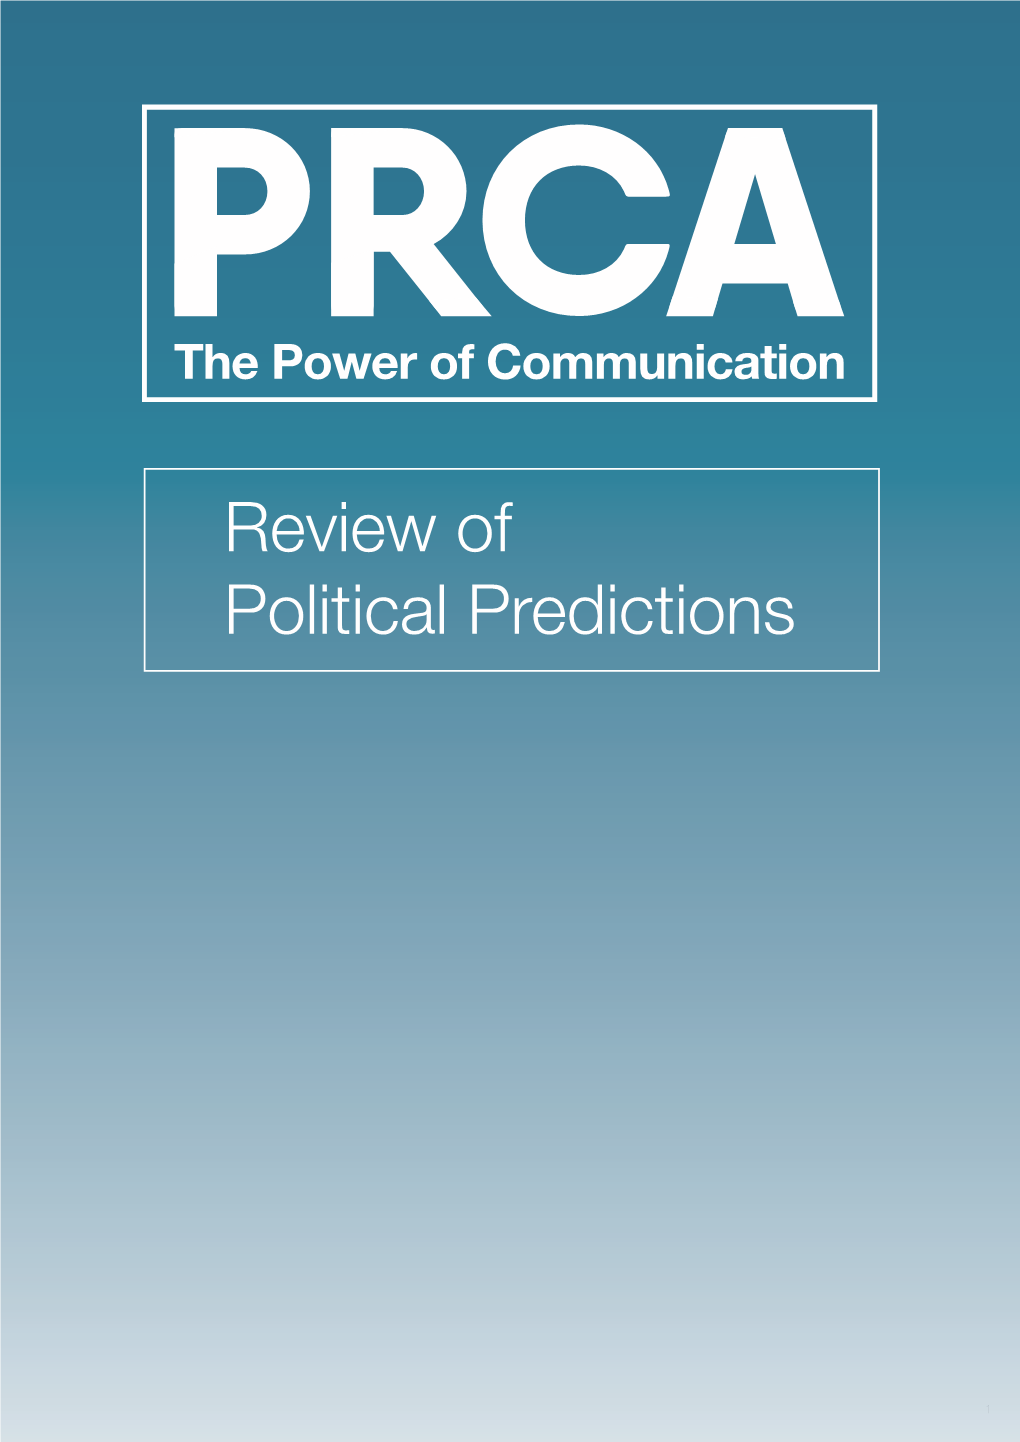 Review of Political Predictions